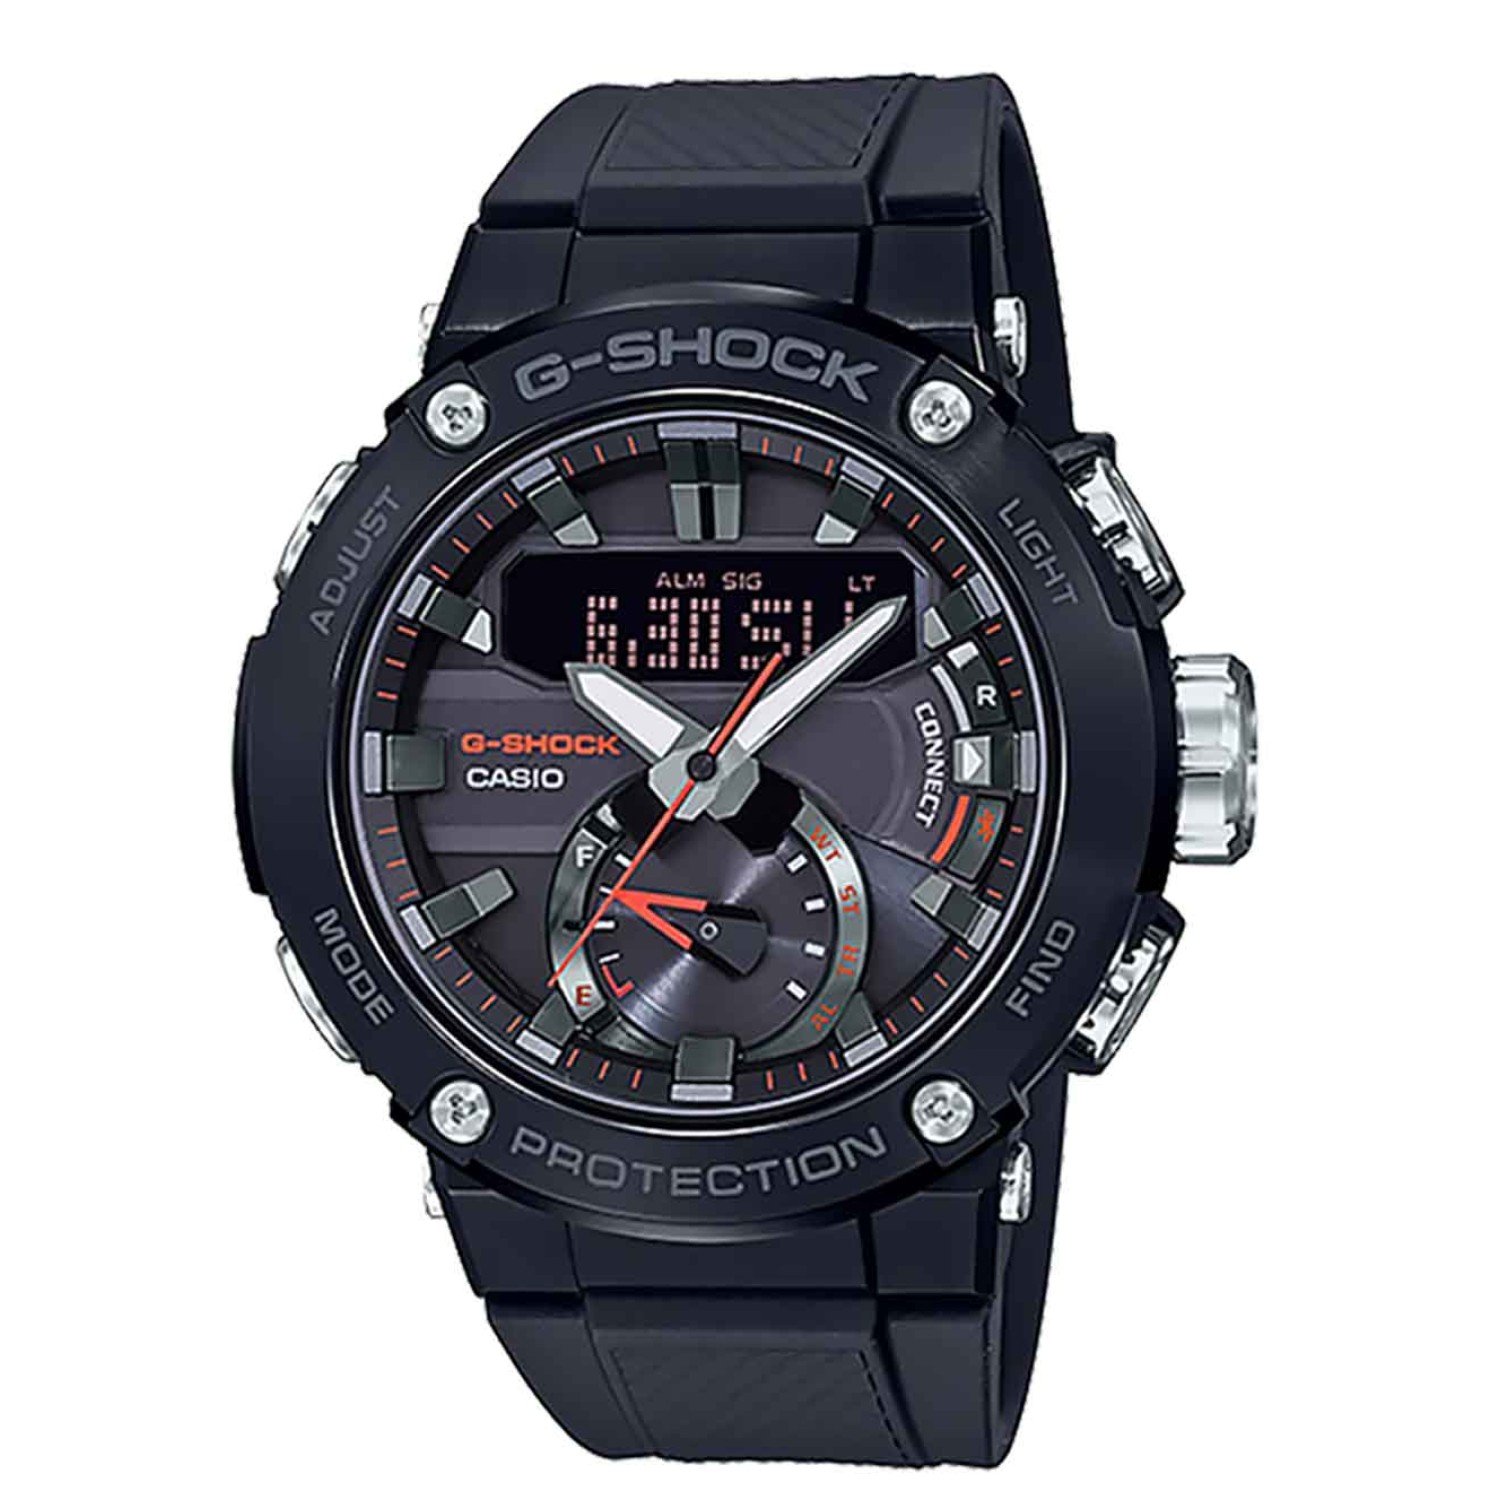 GSTB200B-1A G-Shock G-STEEL Watch.   From G-SHOCK, the watch brand that is constantly setting new standards for timekeeping toughness, come new G-STEEL models that boast a new shock resistant Carbon Core Guard structure. The case is made of @christies.onl